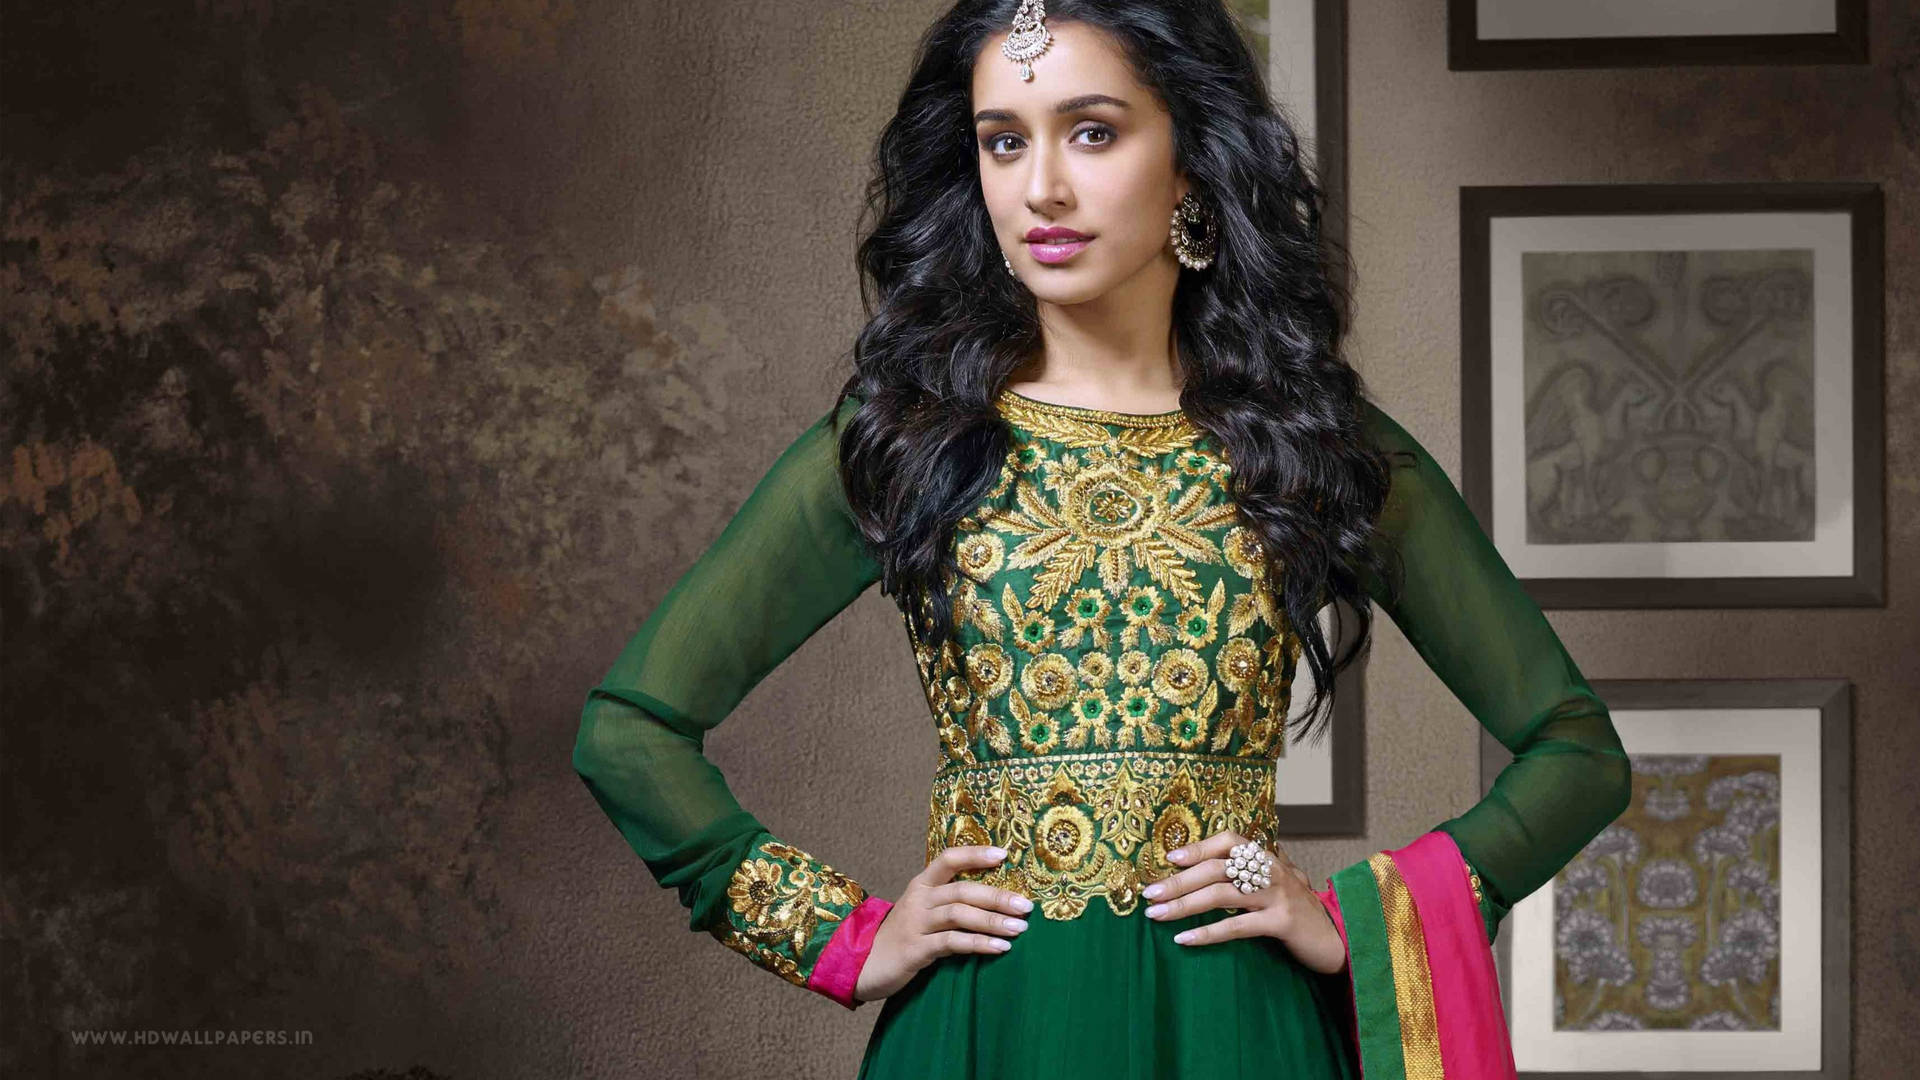 Film Star Shraddha Kapoor Glammed Up In A Sequin Ensemble Background